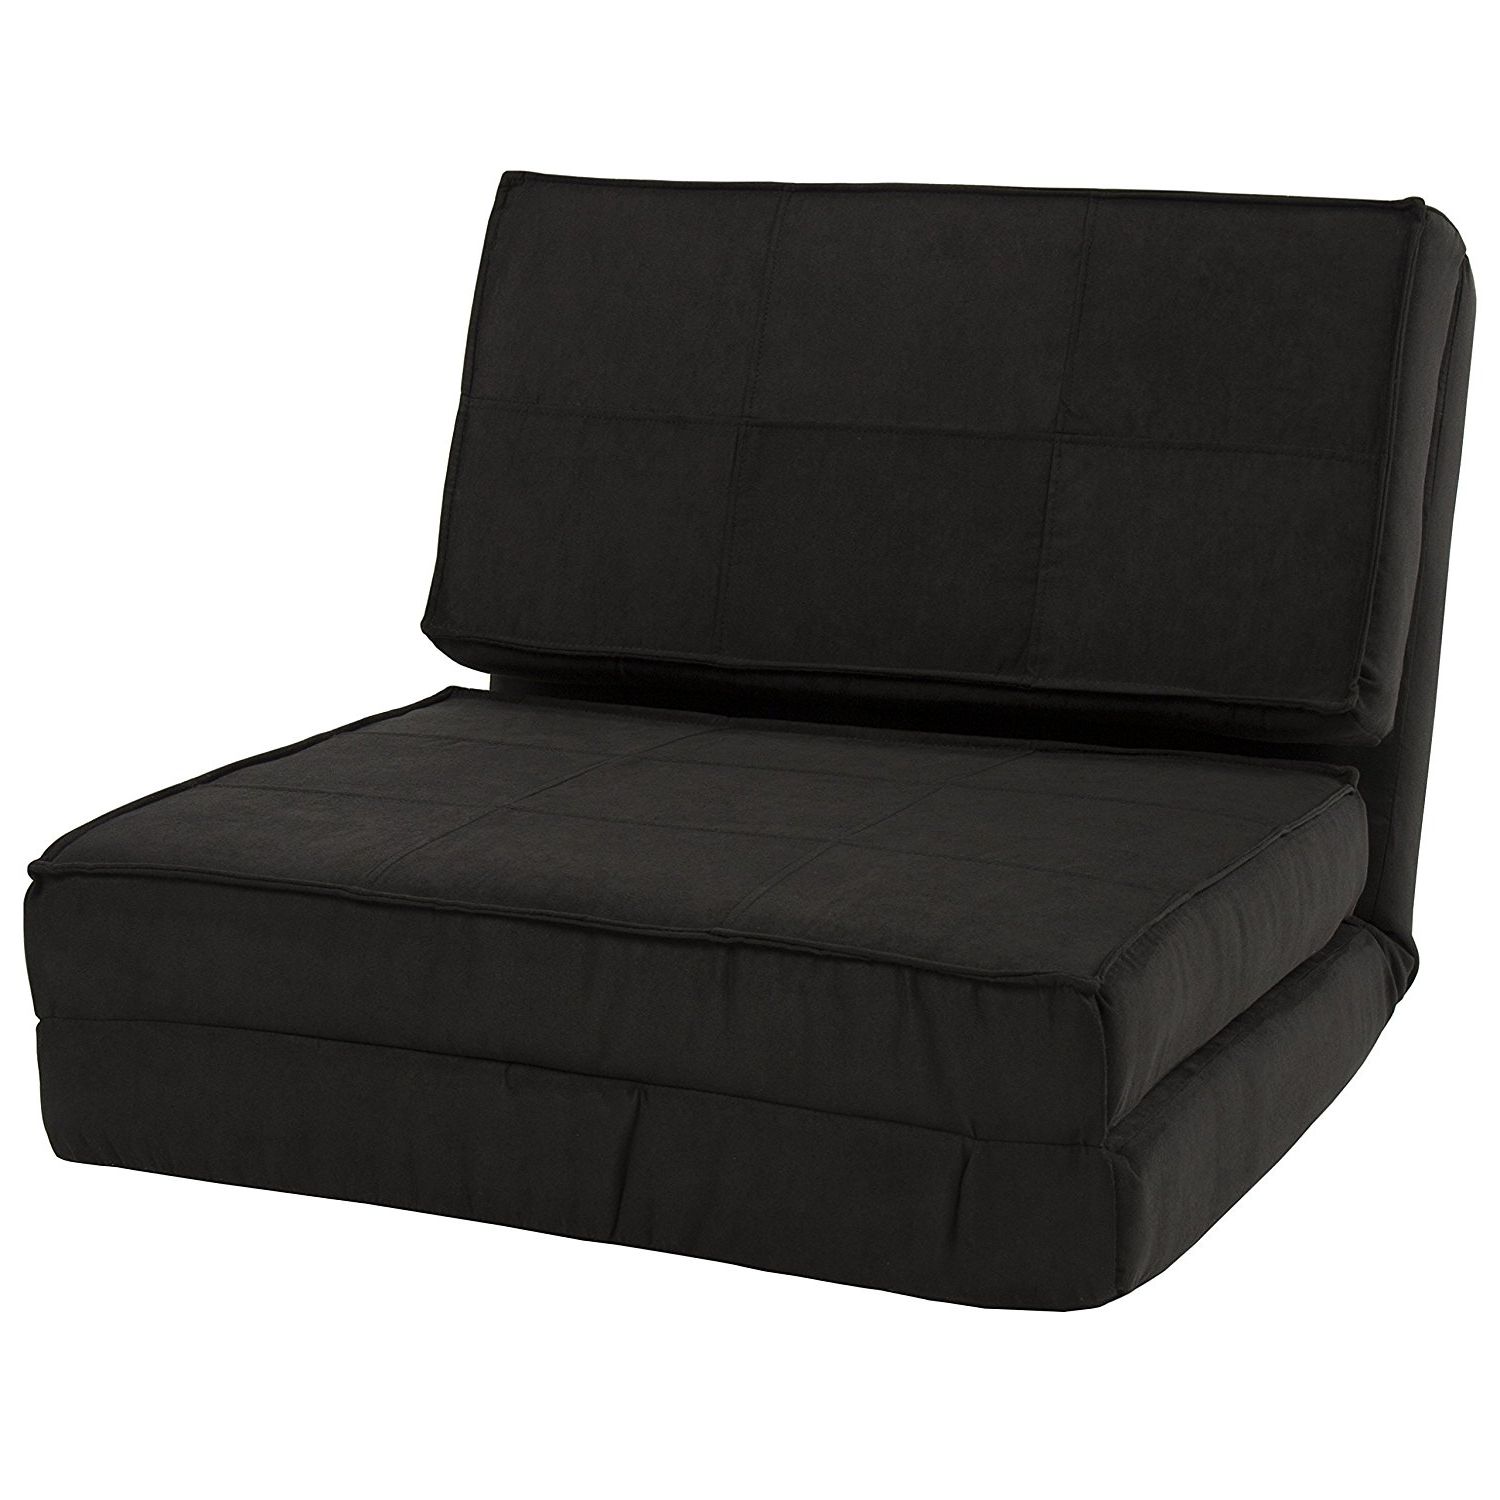 Amazon: Best Choice Products Convertible Sleeper Chair Bed Regarding Most Popular Fold Up Sofa Chairs (View 4 of 15)